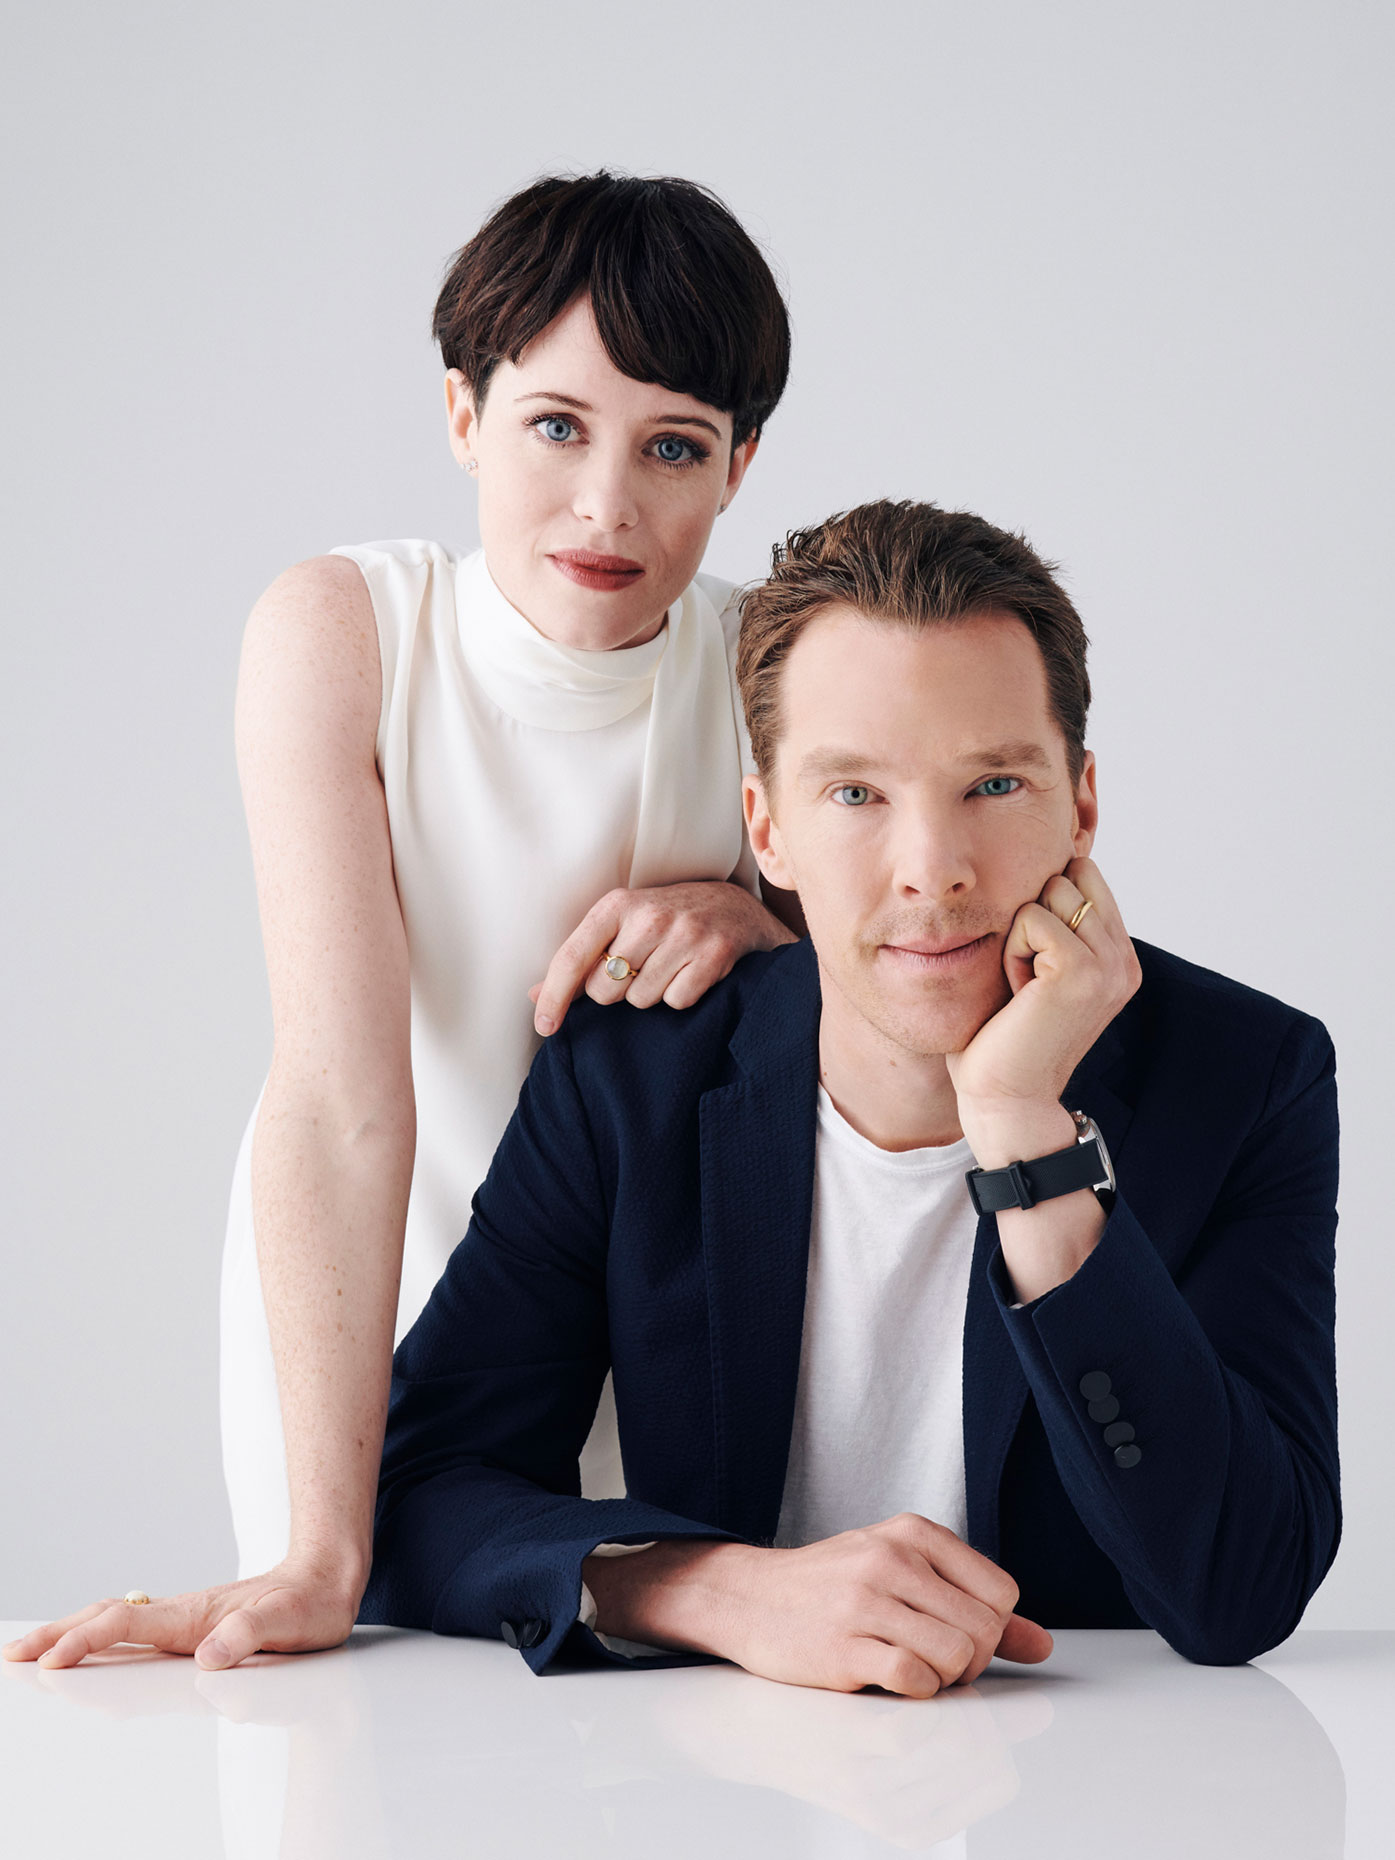 180428_VARIETY_ACTORS_ON_ACTORS_FOY_CUMBERBATCH_043_FINAL_CR